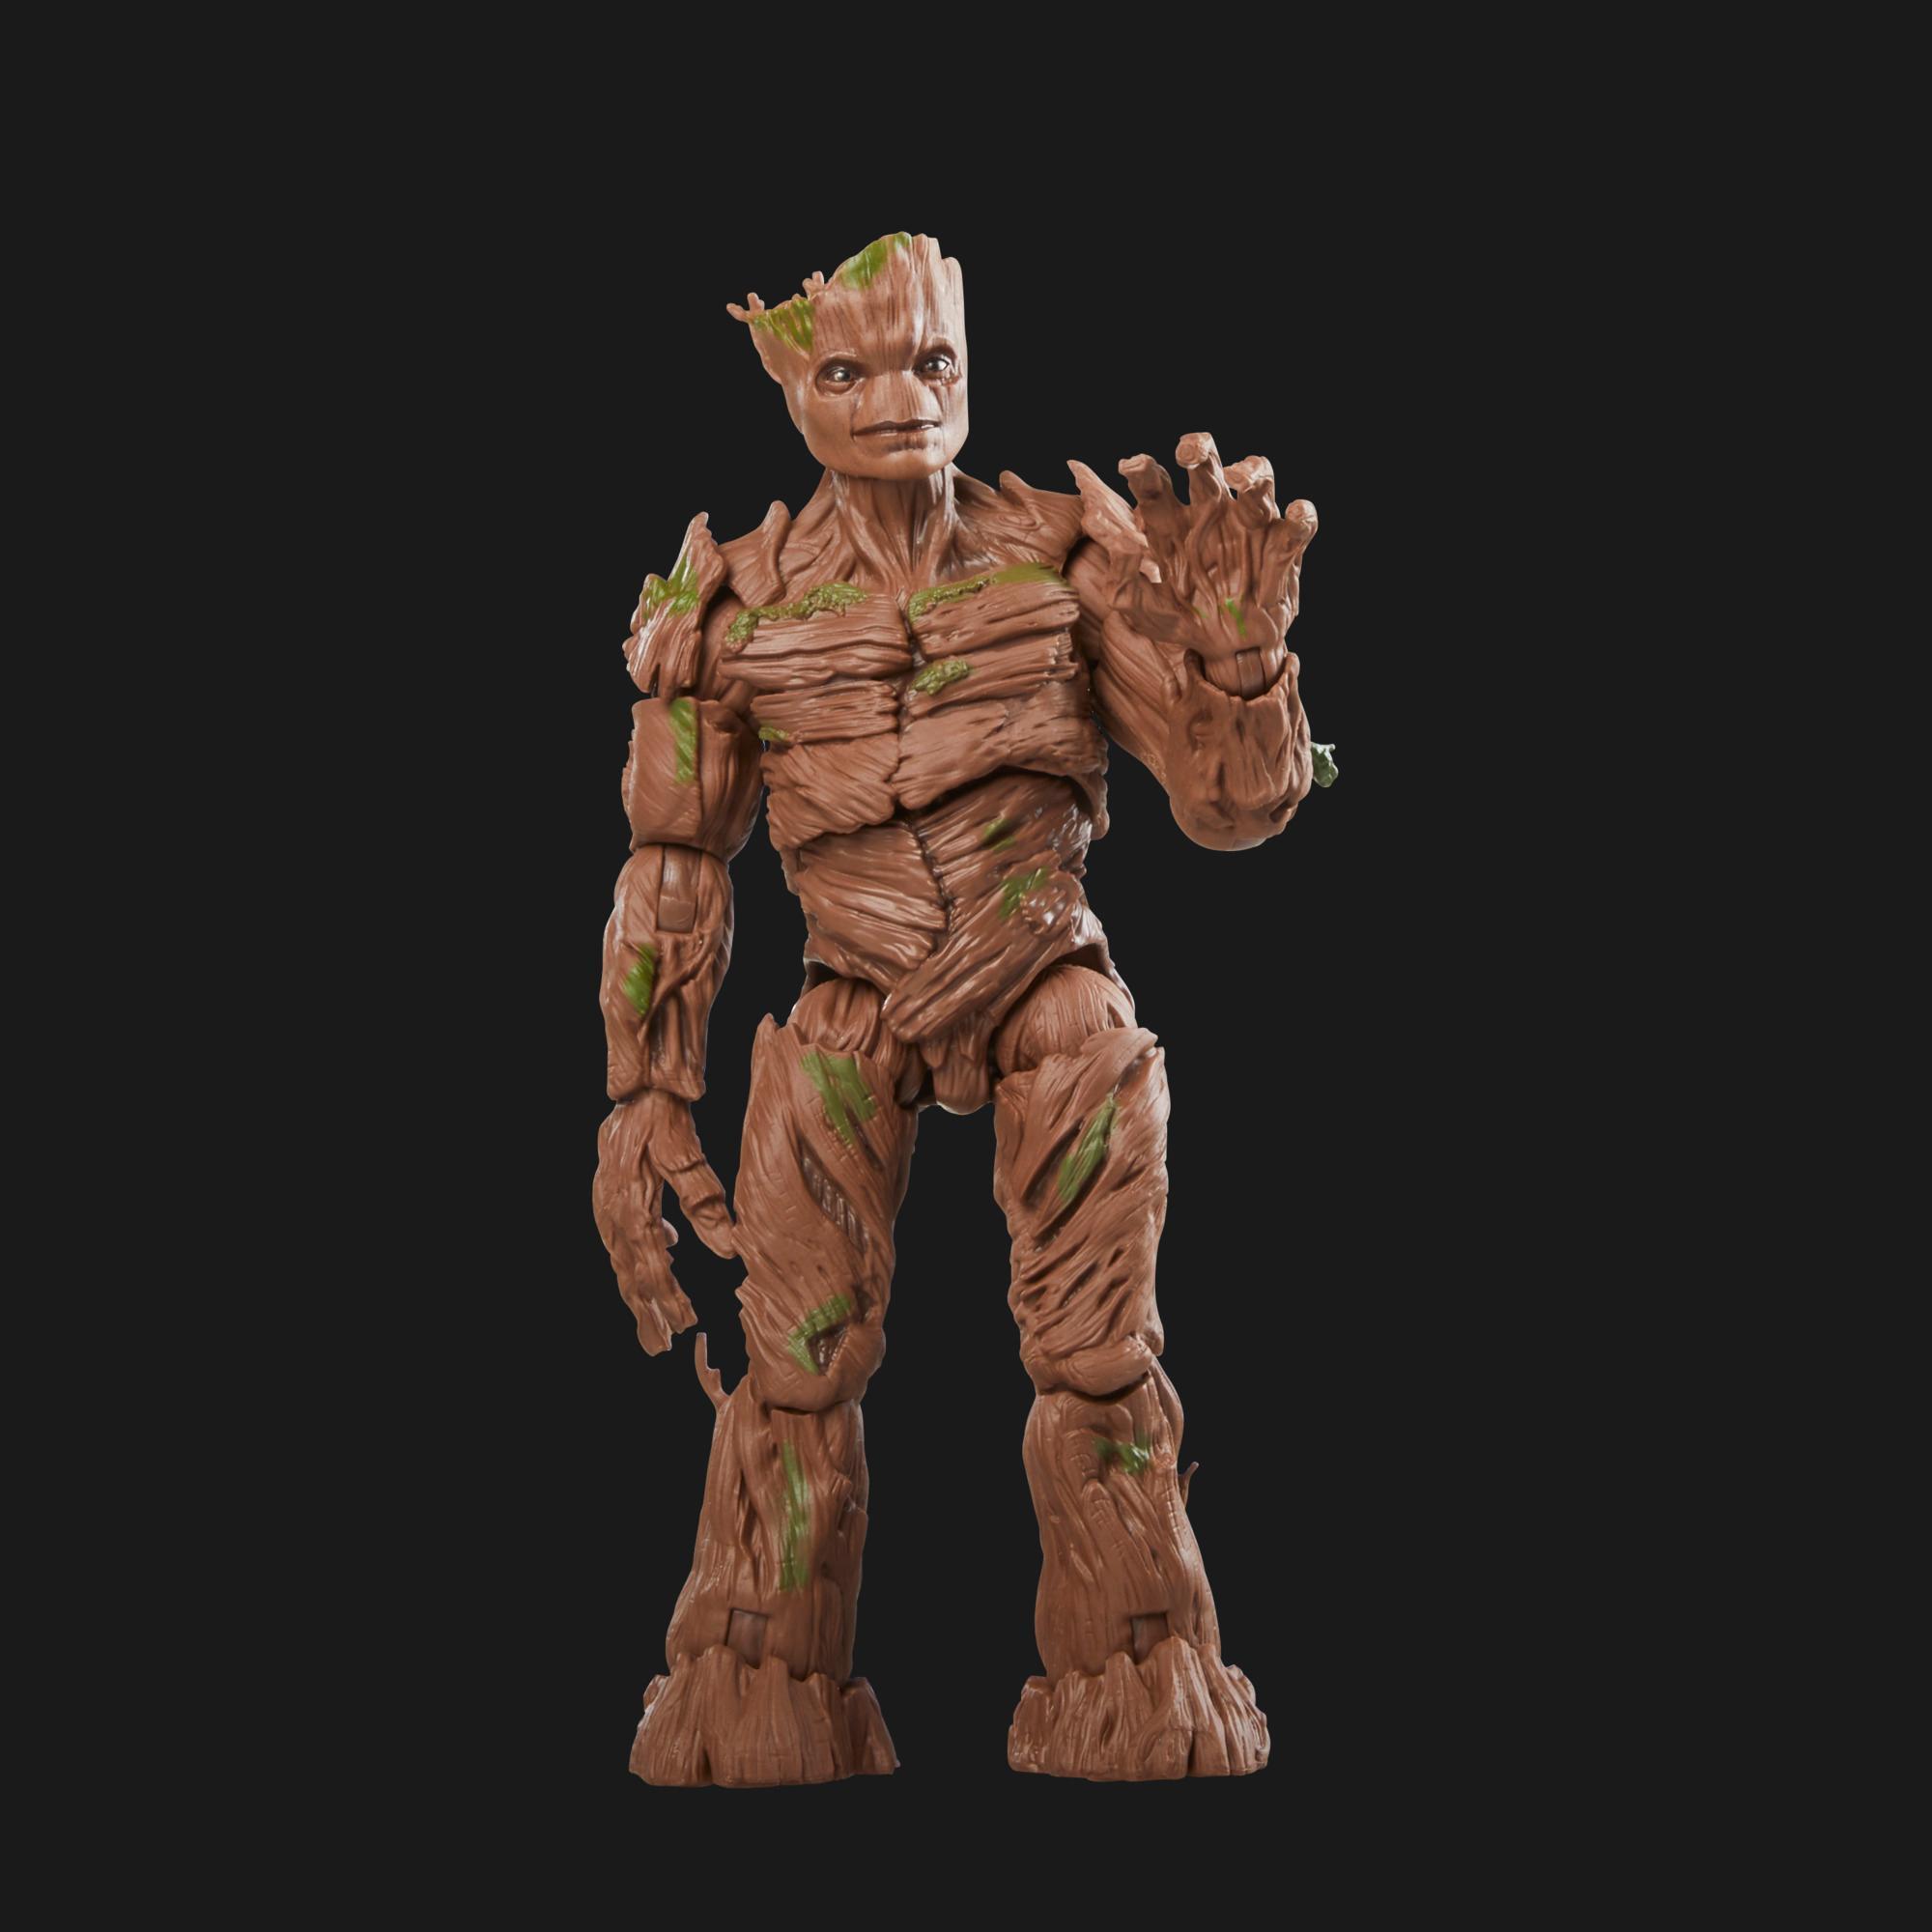 Marvel Legends Series - Groot product thumbnail 1